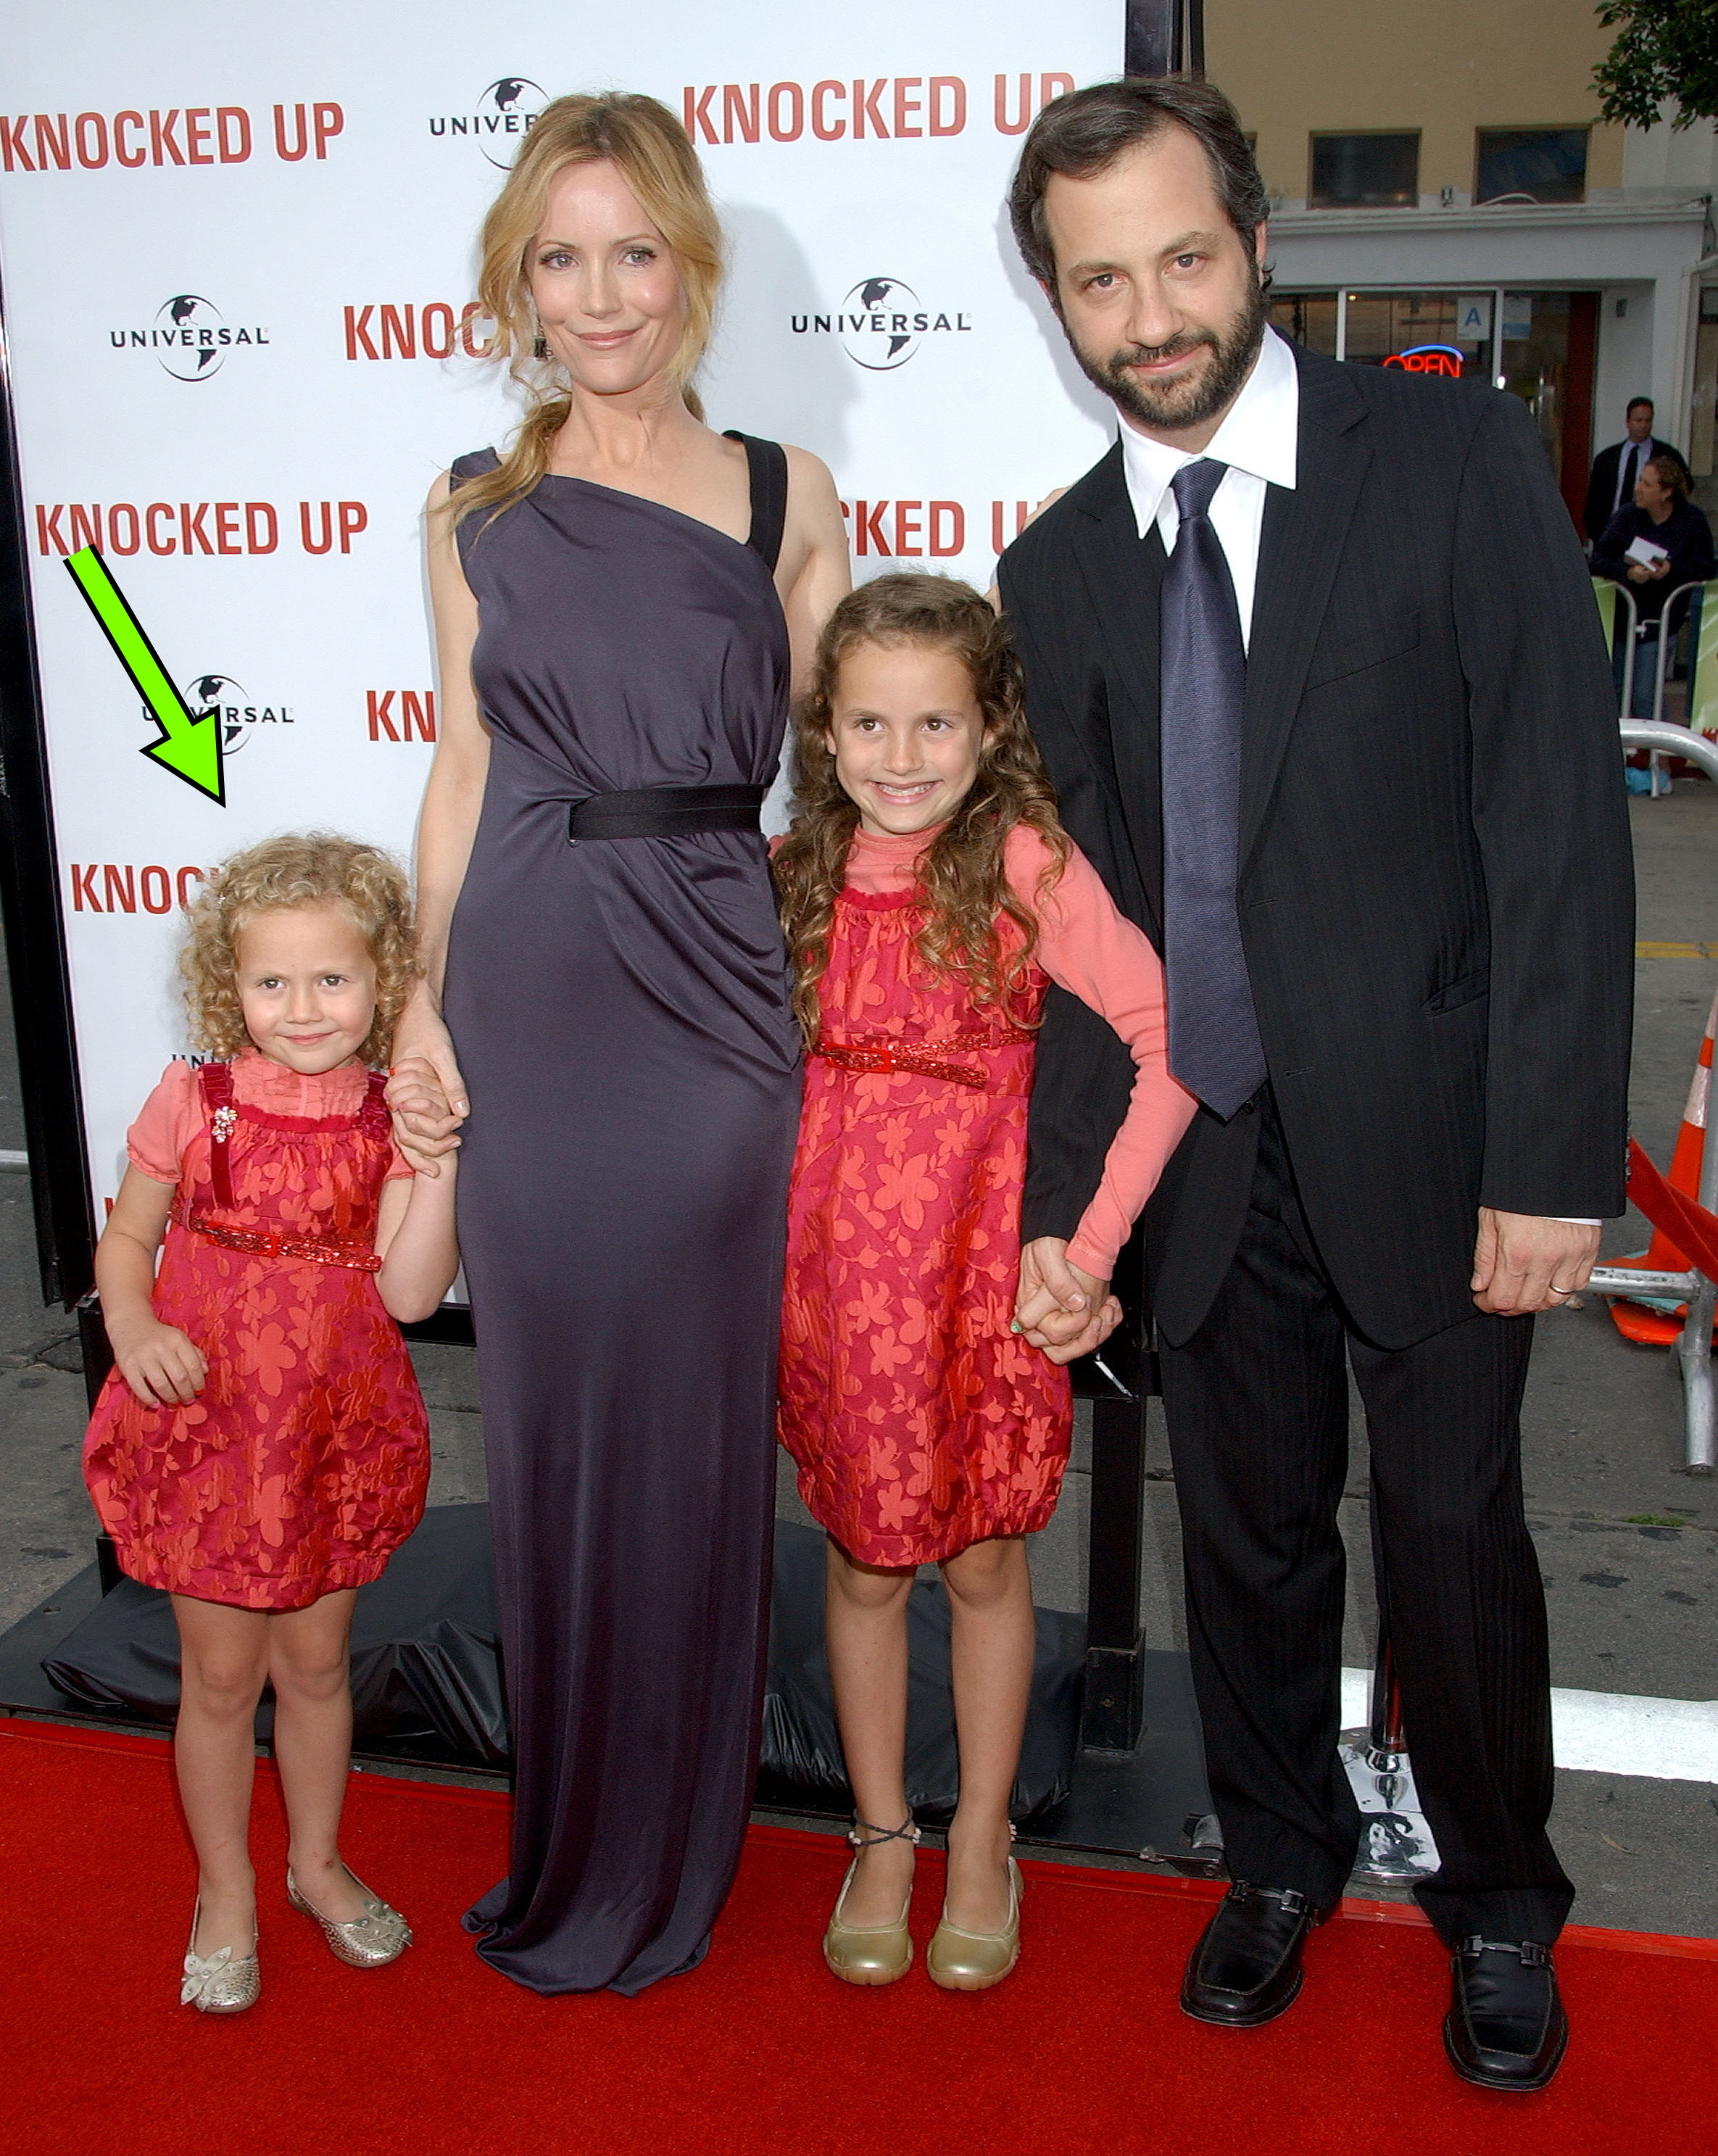 The Apatow family on the red carpet